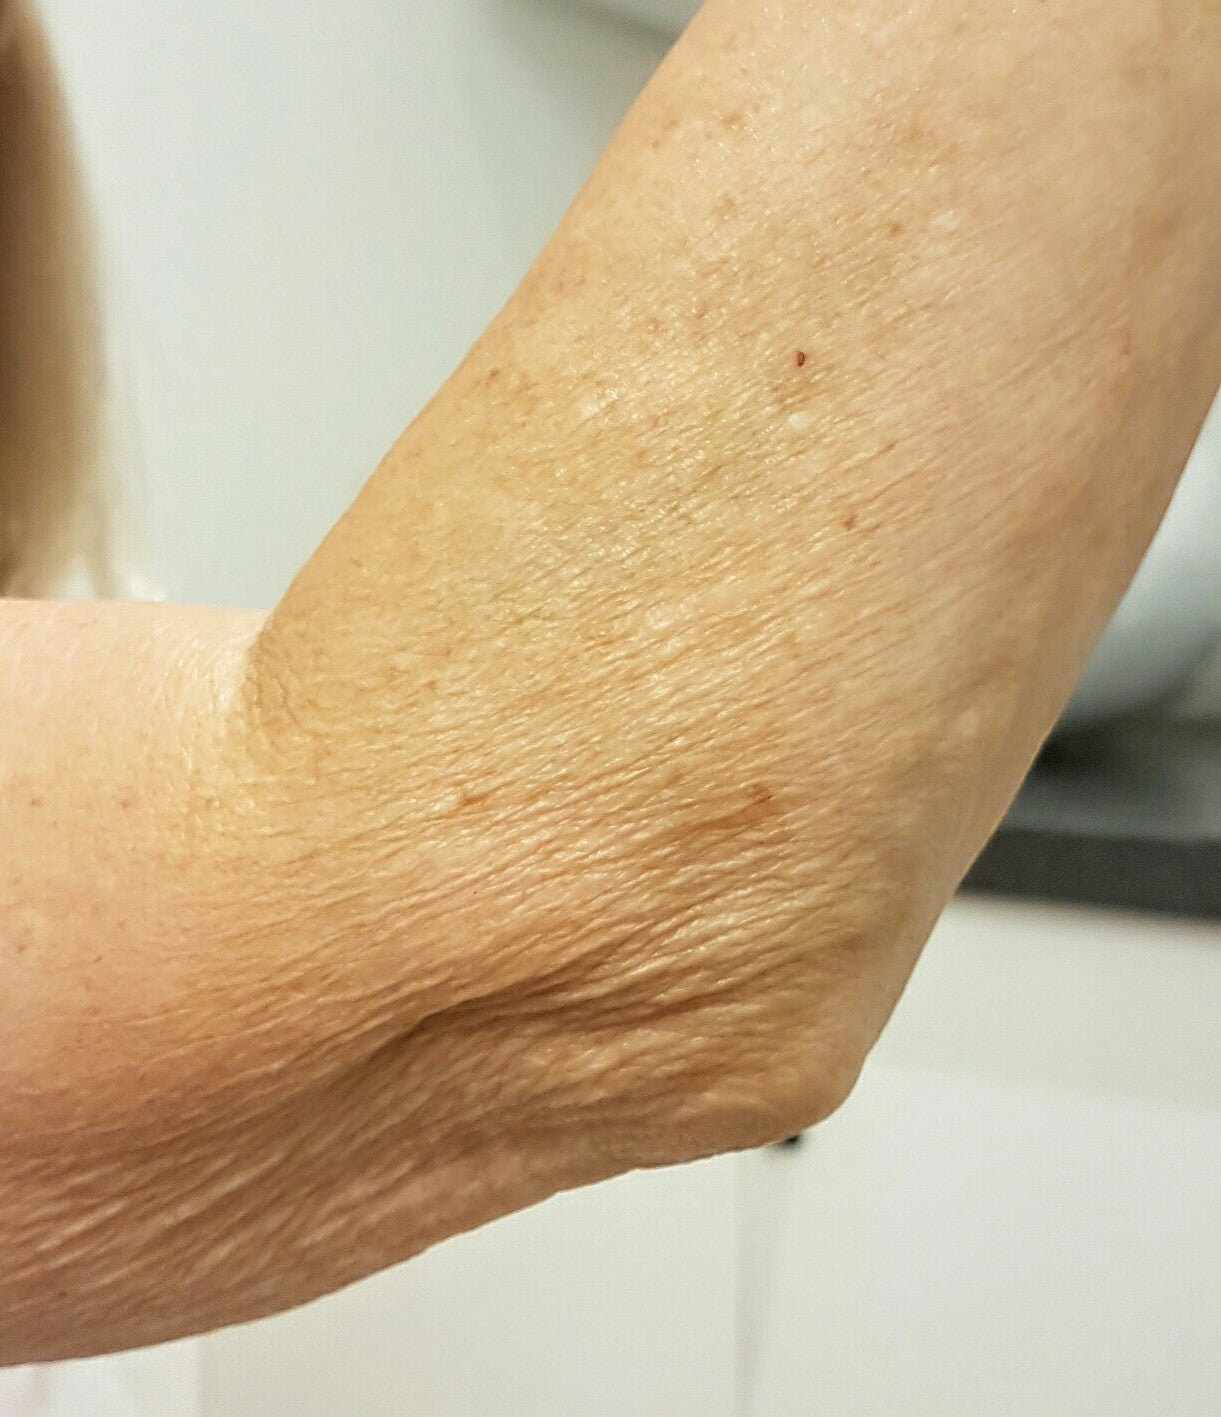 Arm with crepey skin